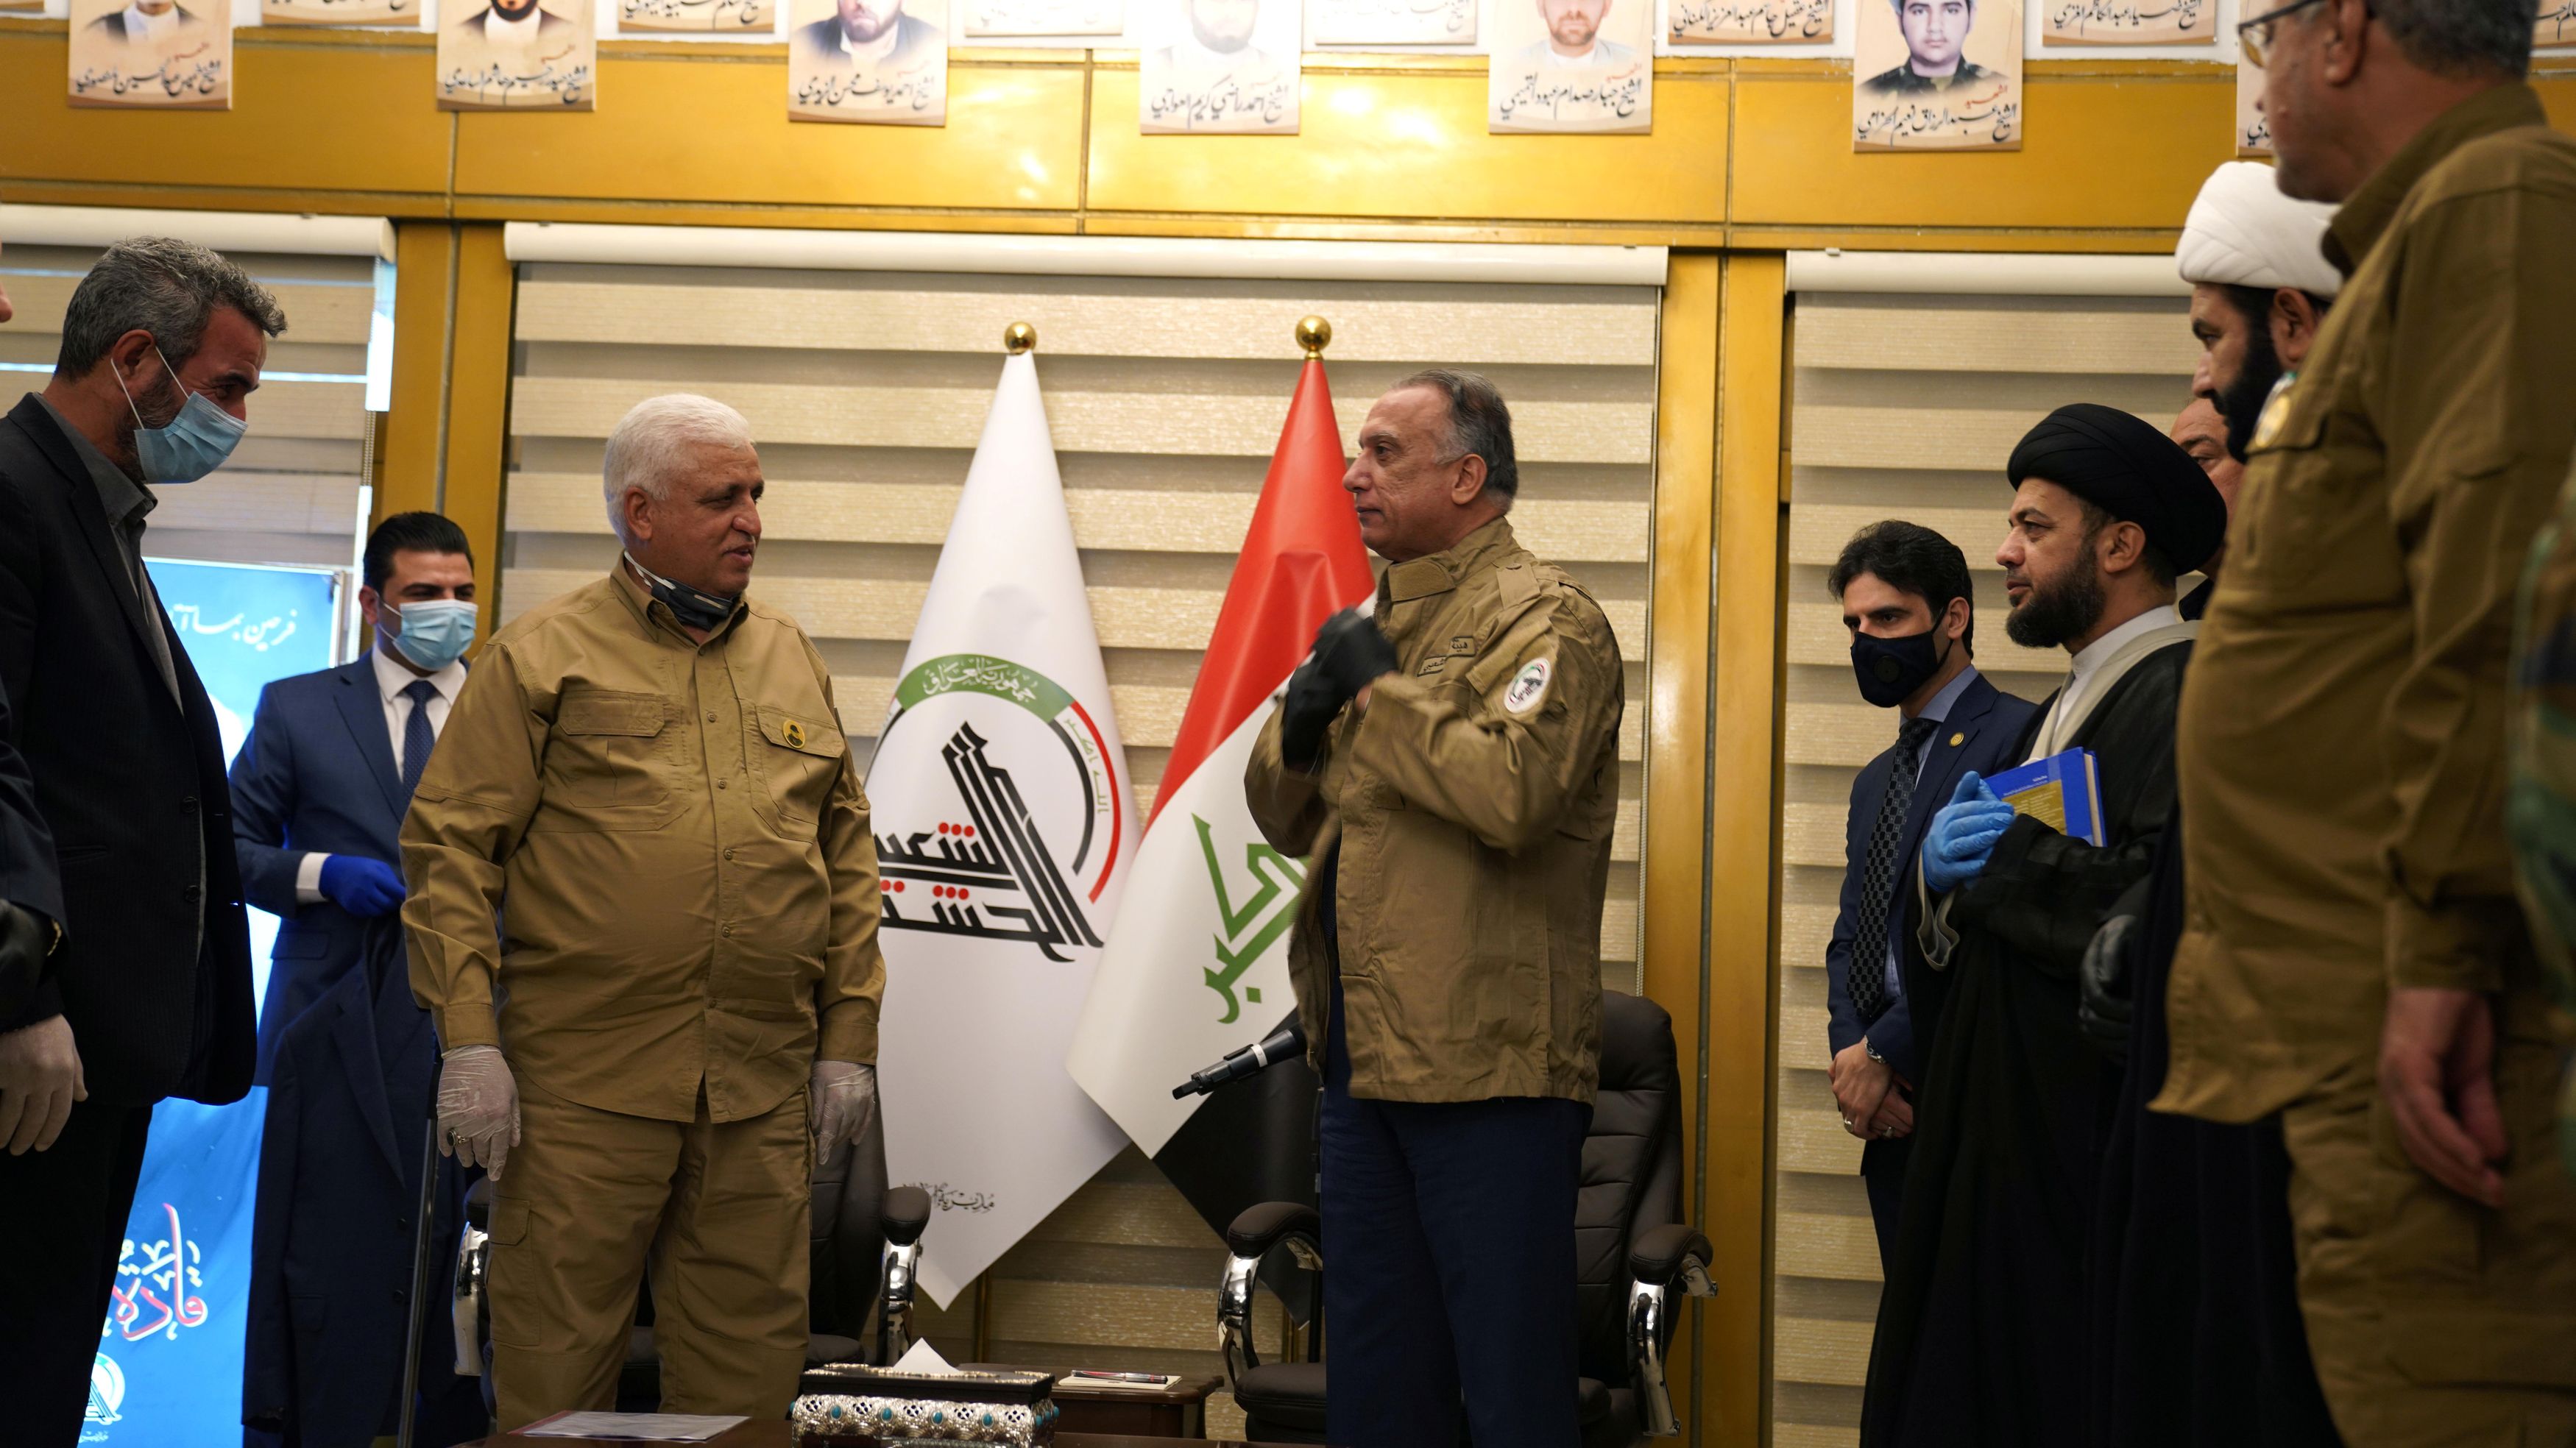 Iraqi Prime Minister Mustafa al-Kadhimi wears a military uniform of Popular Mobilization forces during his meeting with Head of the Popular Mobilization forces Faleh al-Fayyad in Baghdad